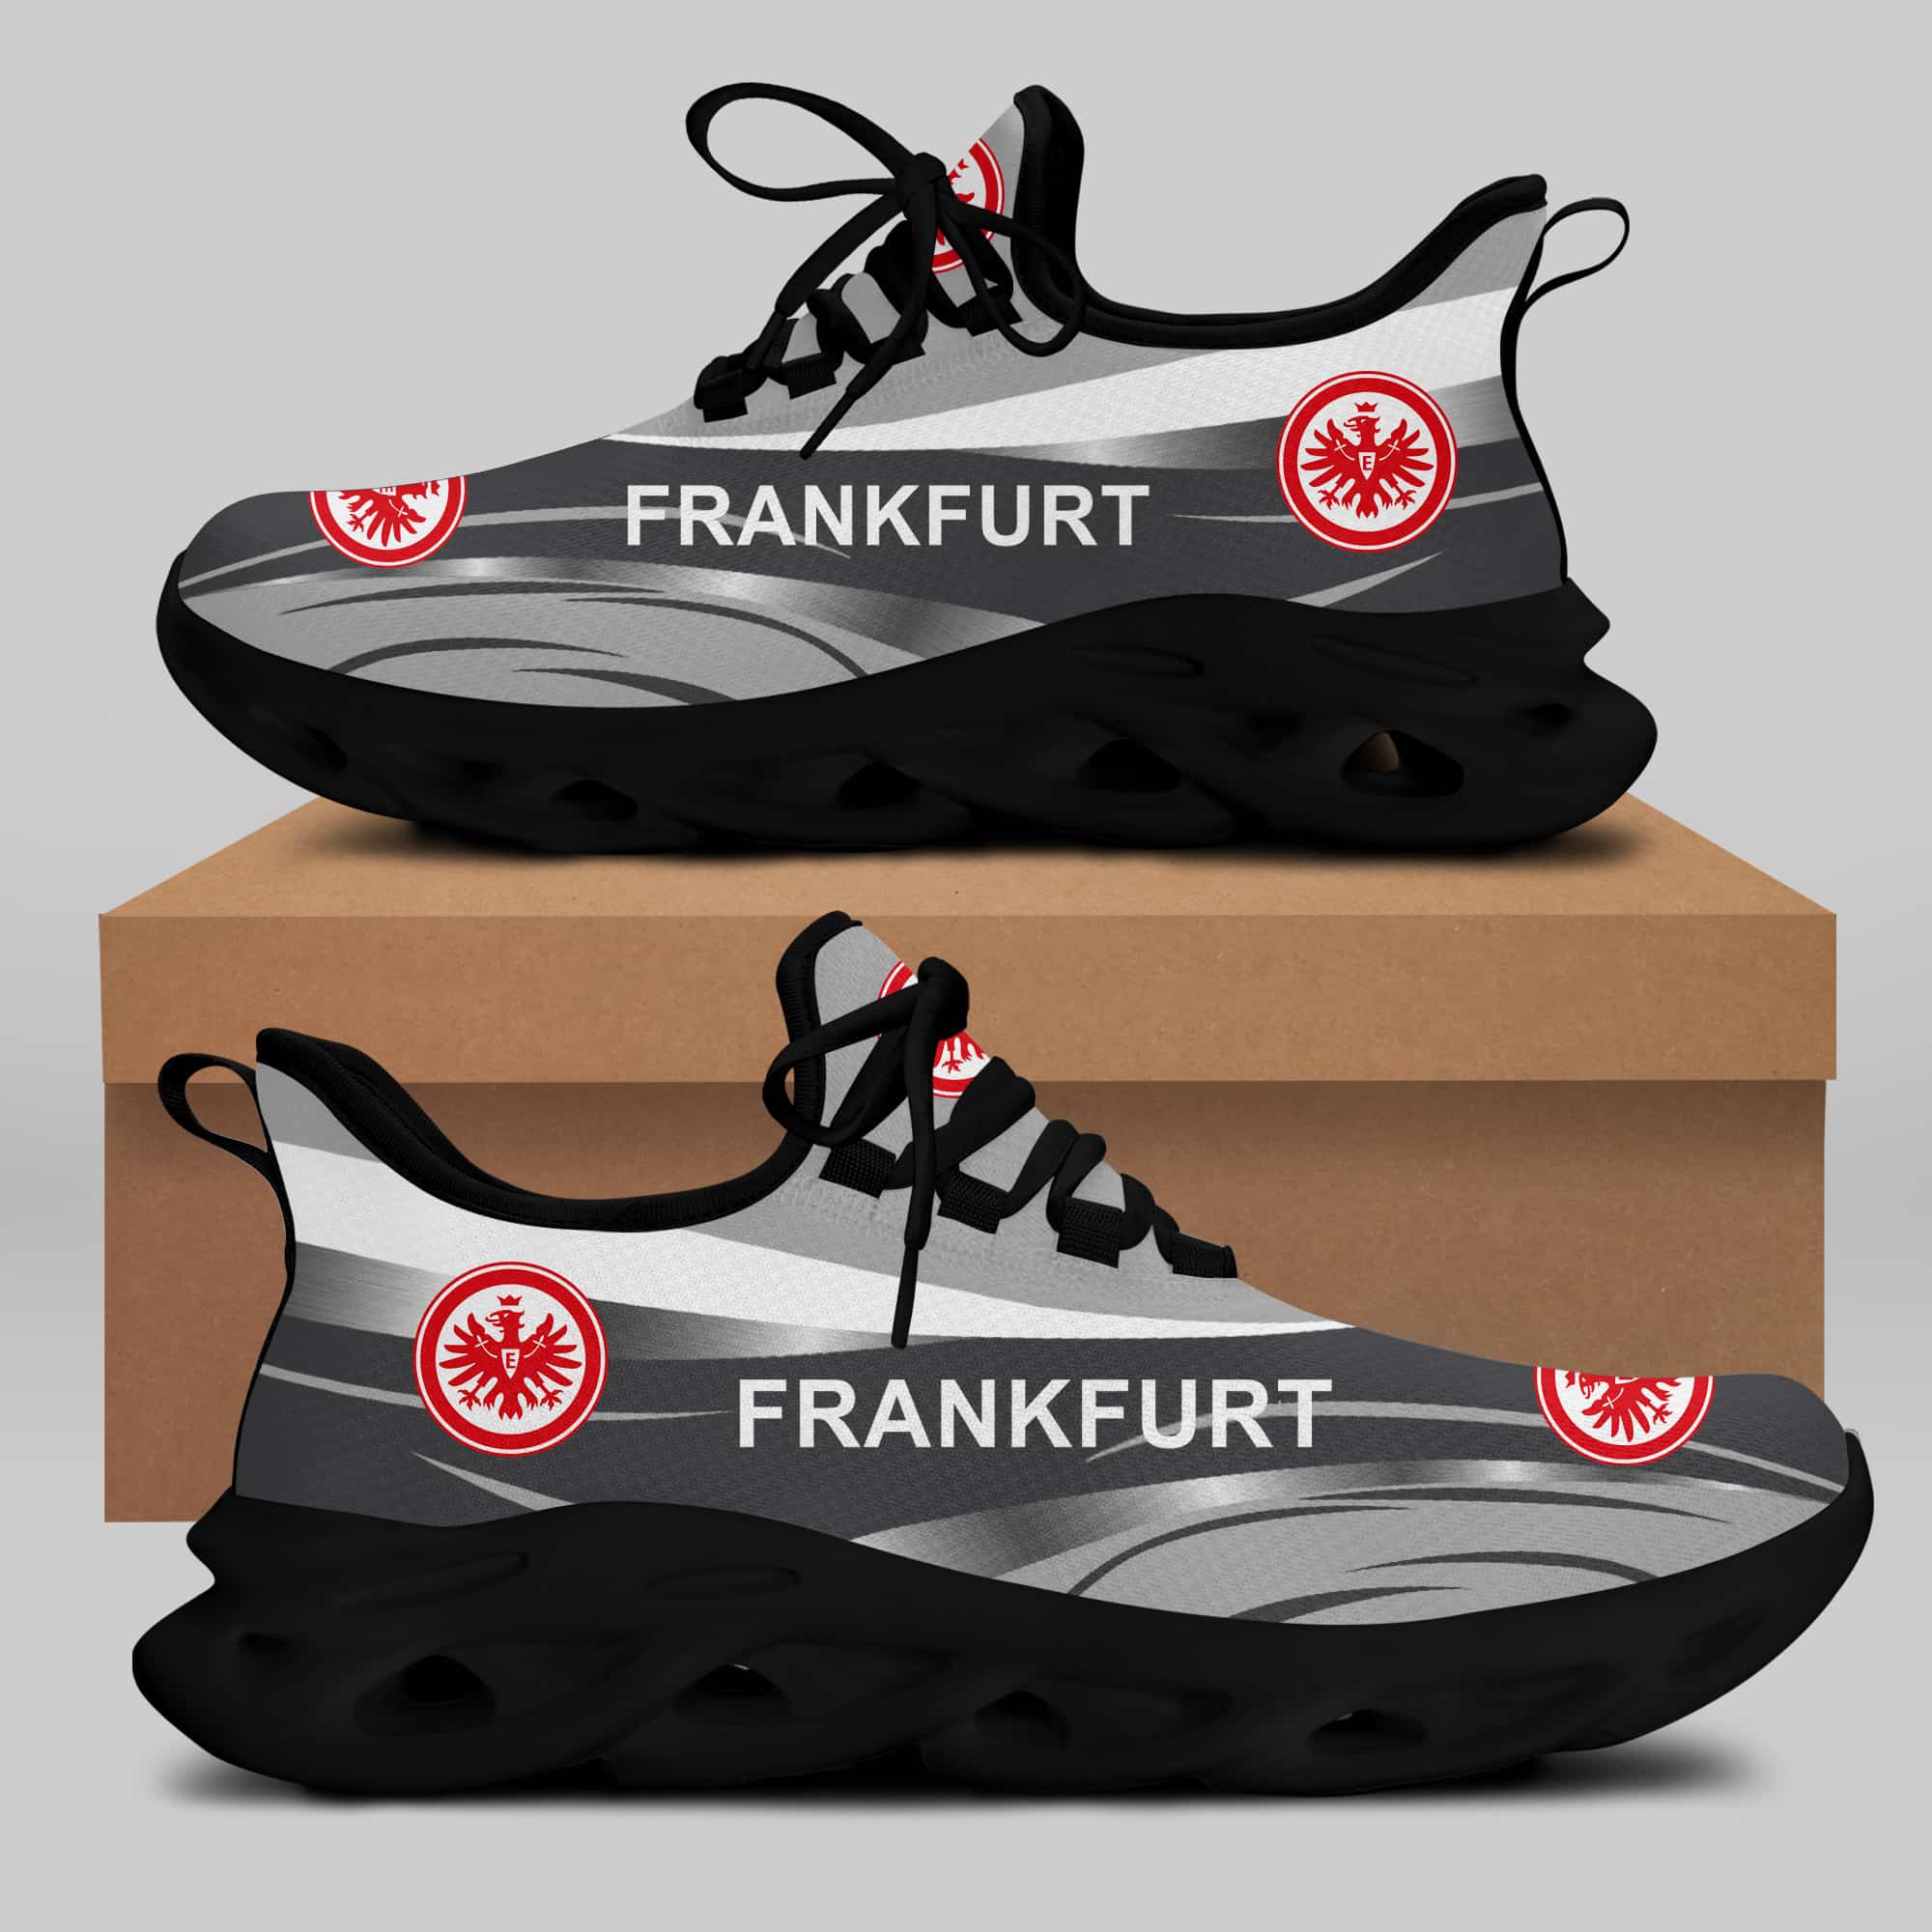 Eintracht Frankfurt Running Shoes Max Soul Shoes Sneakers Ver 33 2